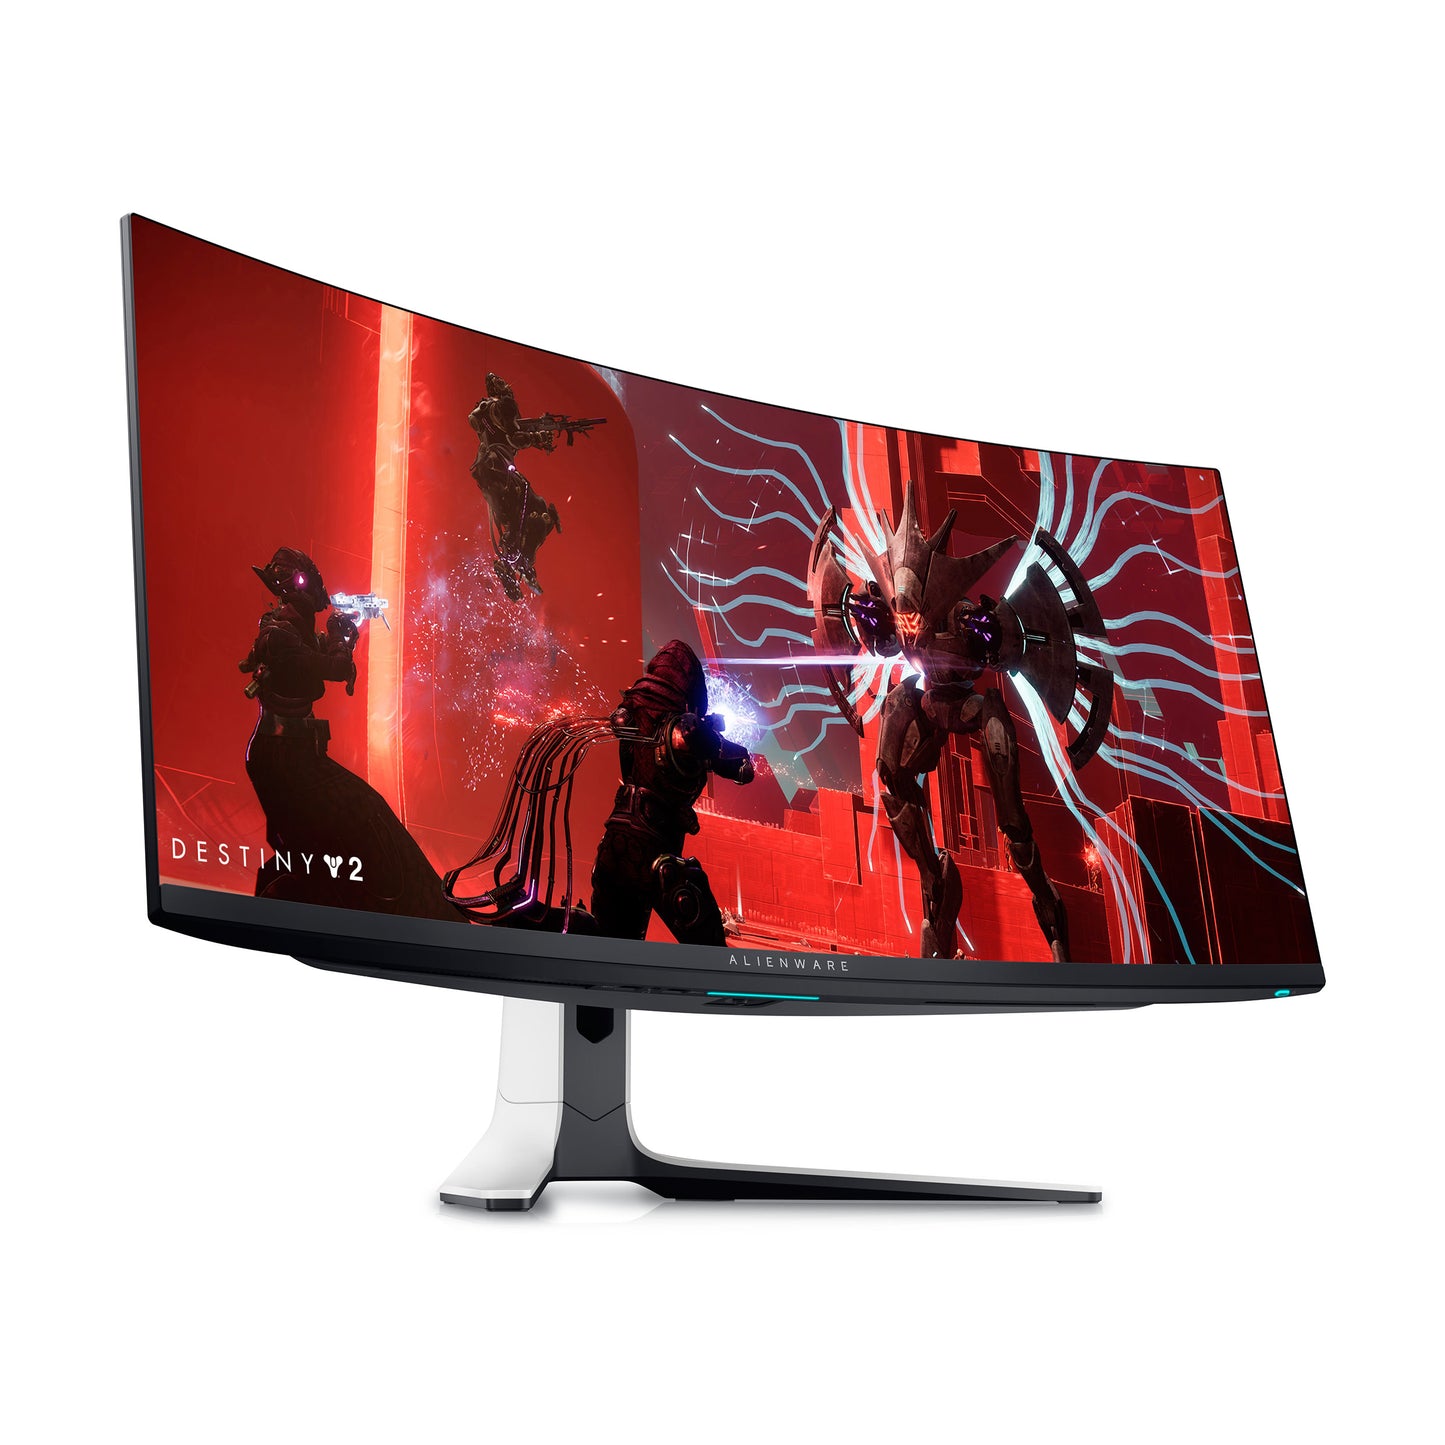 Alienware 34 Curved QD-OLED Gaming Monitor - AW3423DW